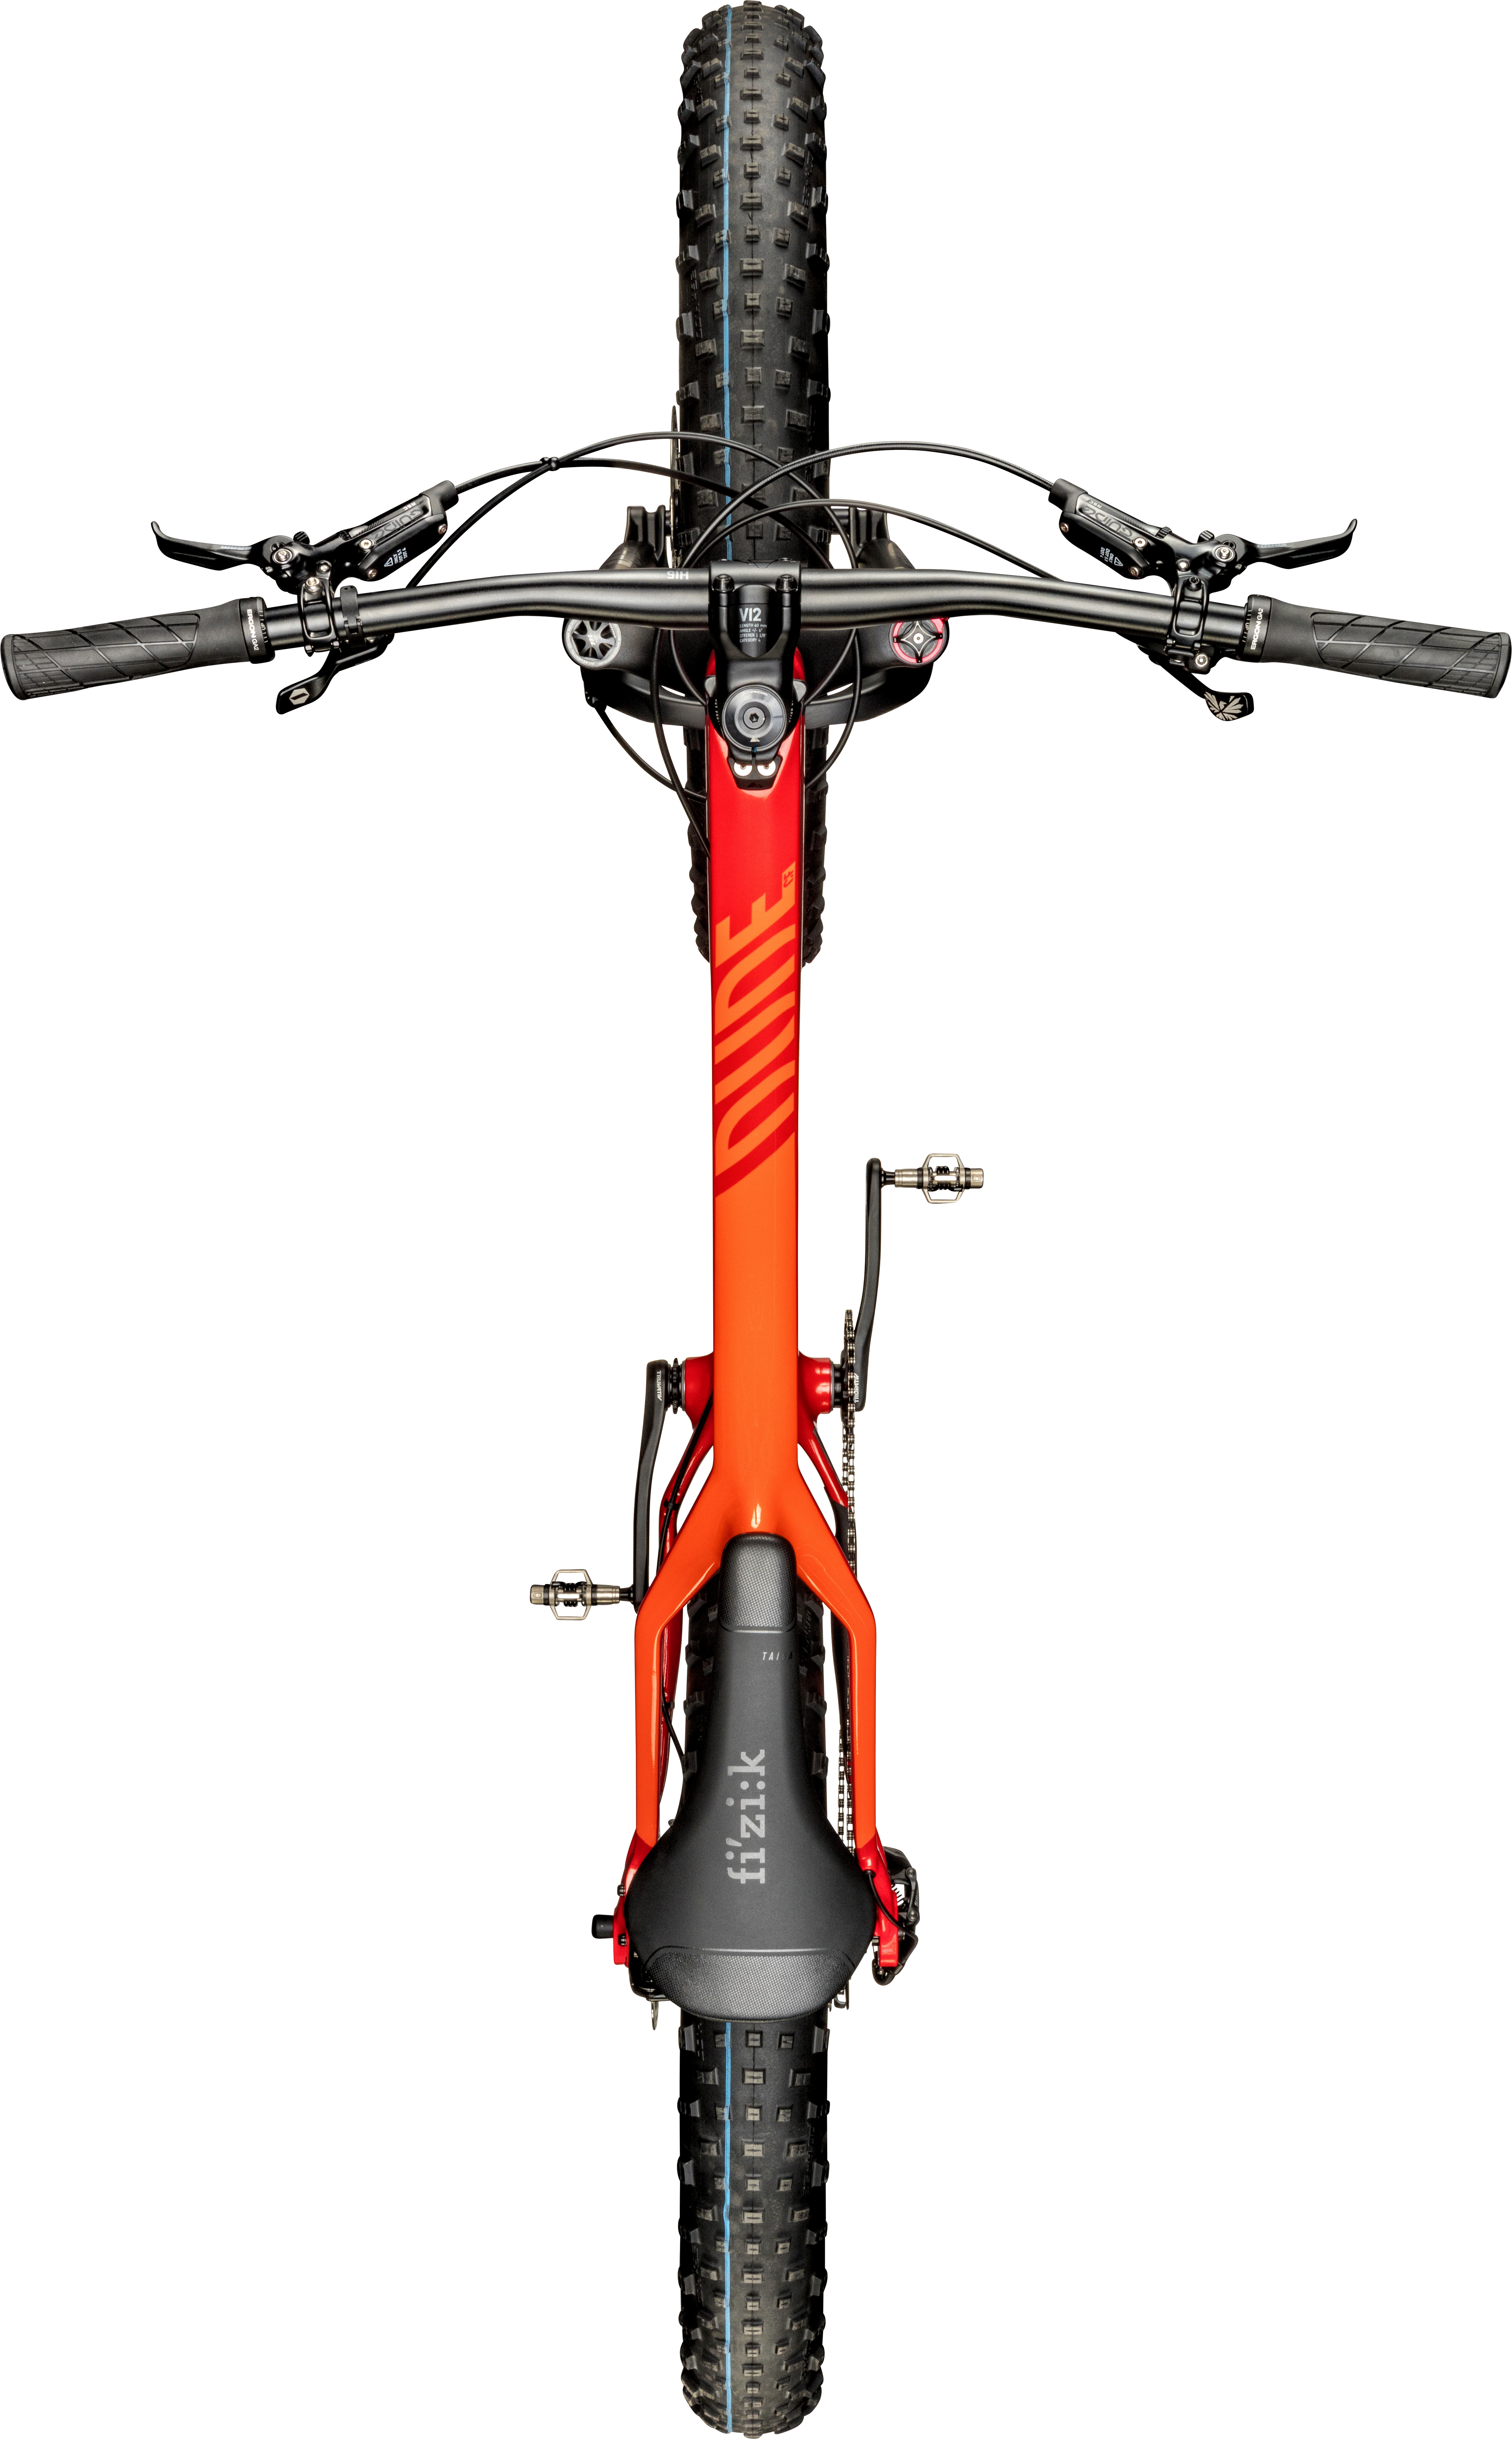 A Top View Of A Bicycle